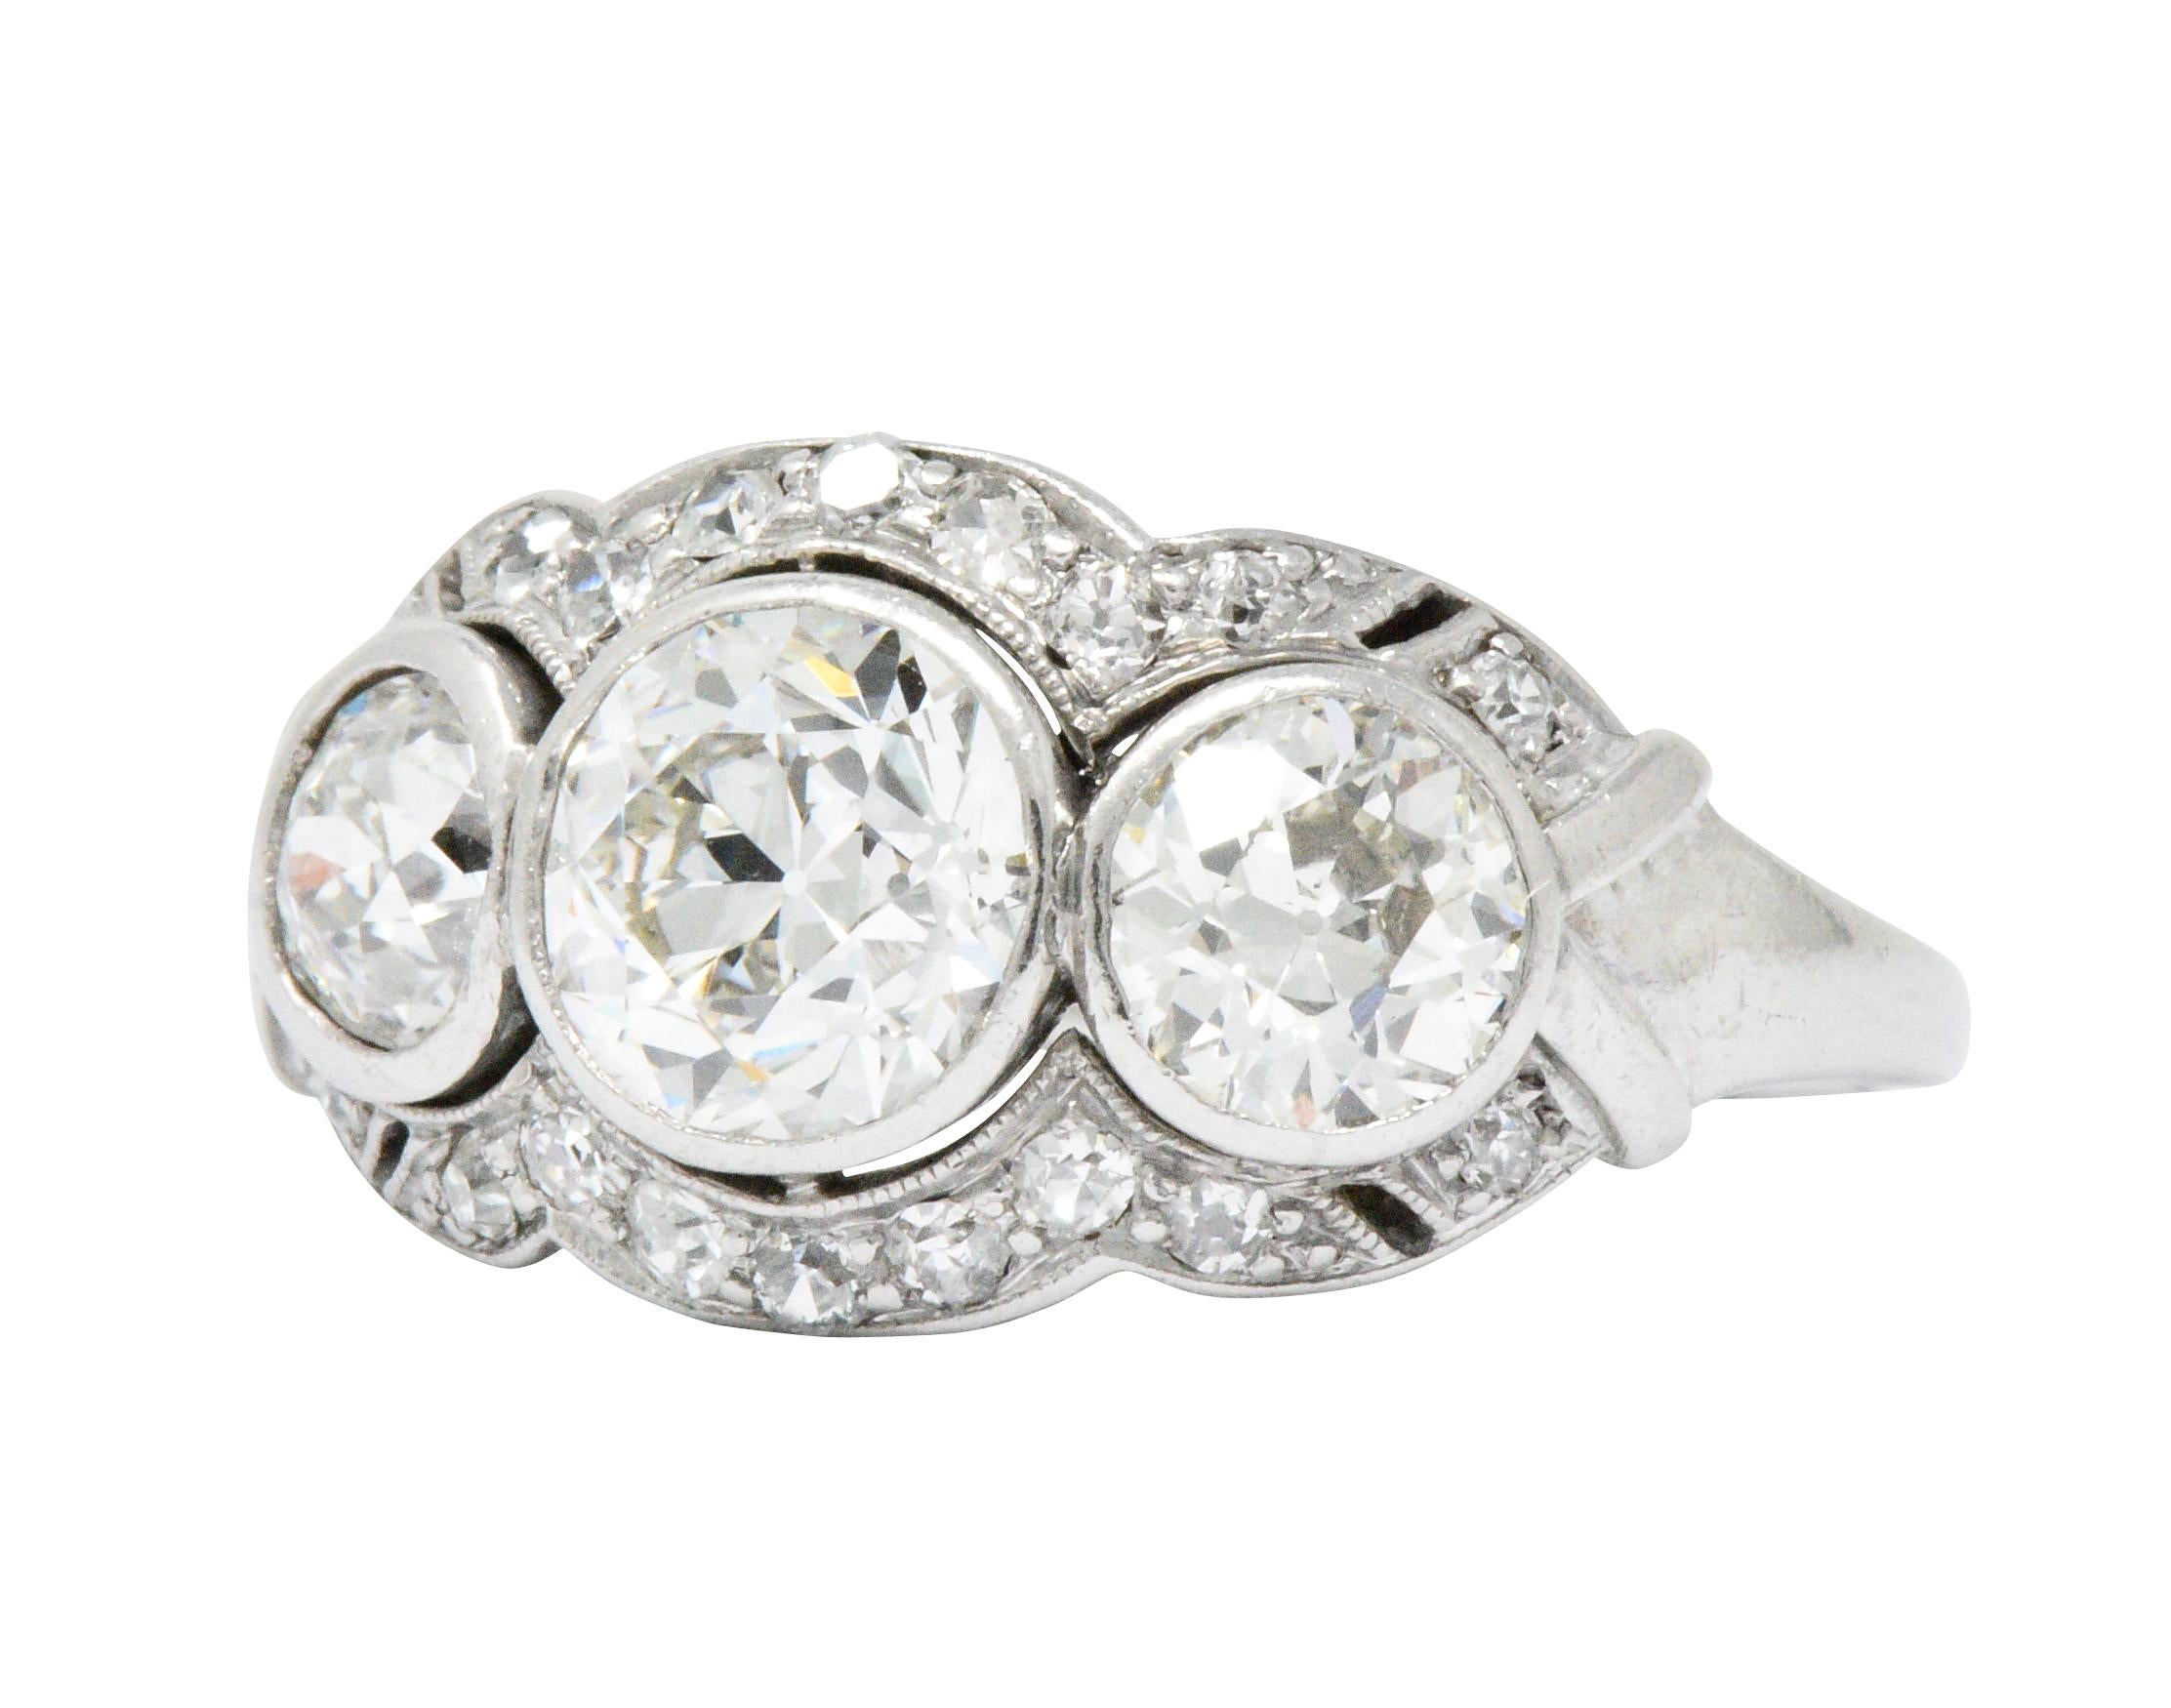 Centering an old European cut diamond weighing approximately 1.25 carats, J color and VS1 clarity

Flanked by an old European cut diamond on each side weighing approximately 0.50 J/K color with SI1 clarity, and 0.60 carats I/J color with VS2